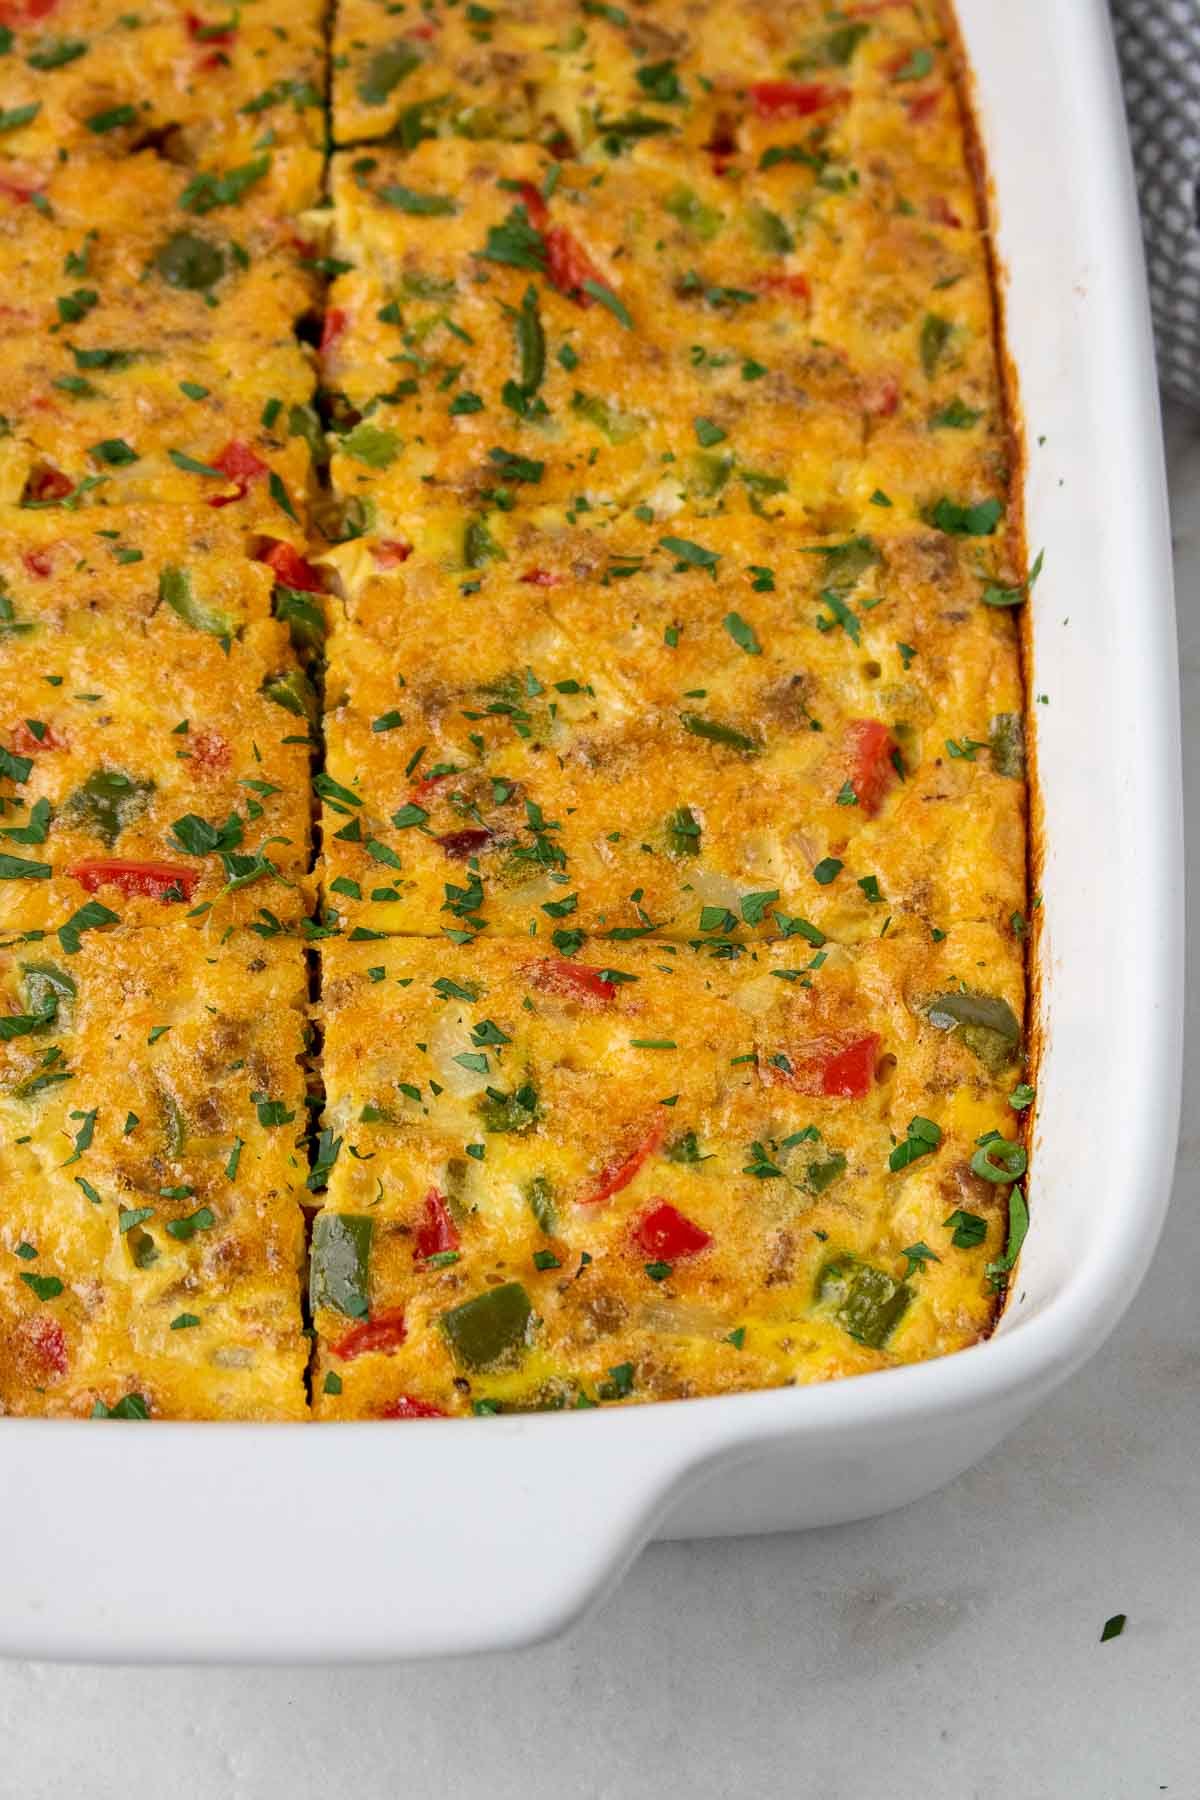 Cooked breakfast egg bake casserole in a dish sliced and ready to eat